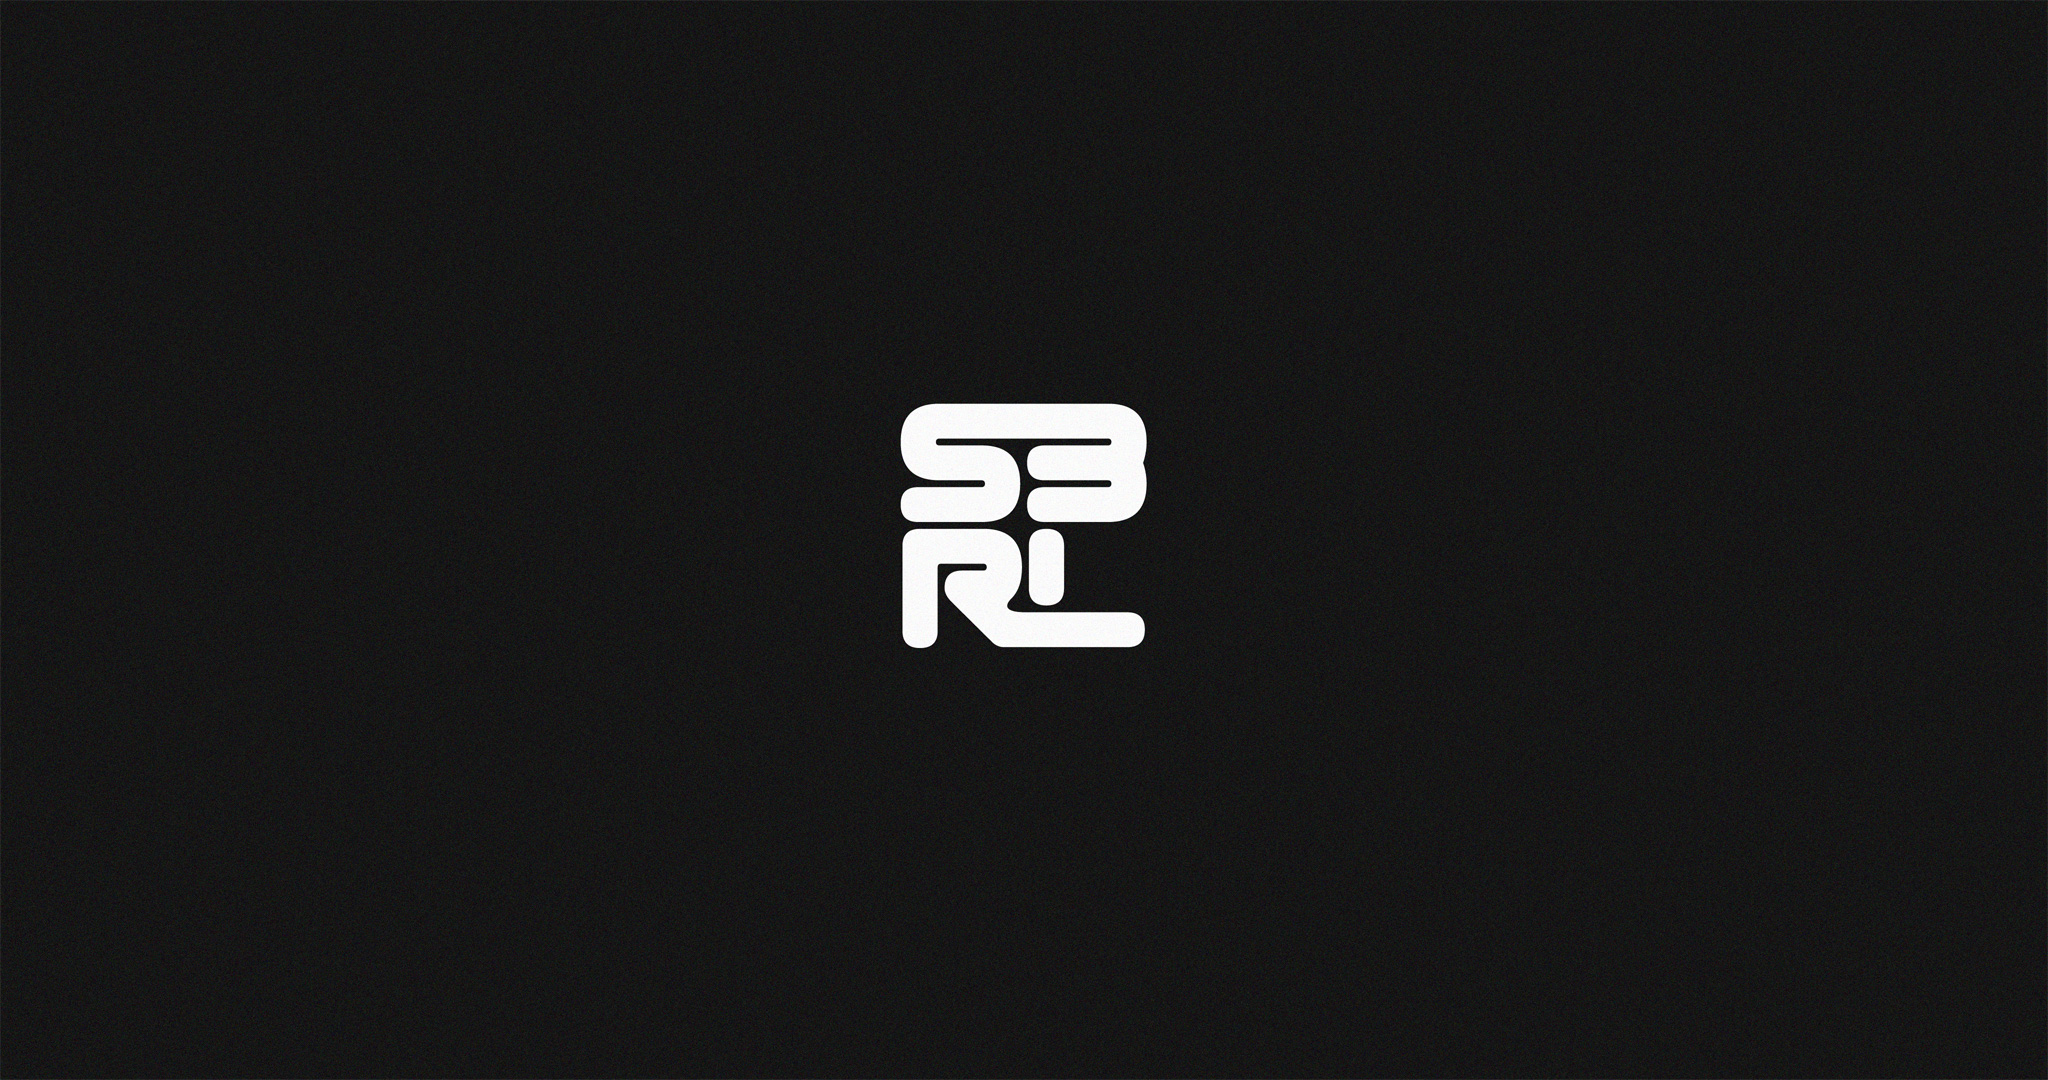 Compact, square version of the S3RL logotype, colored white against a black background.